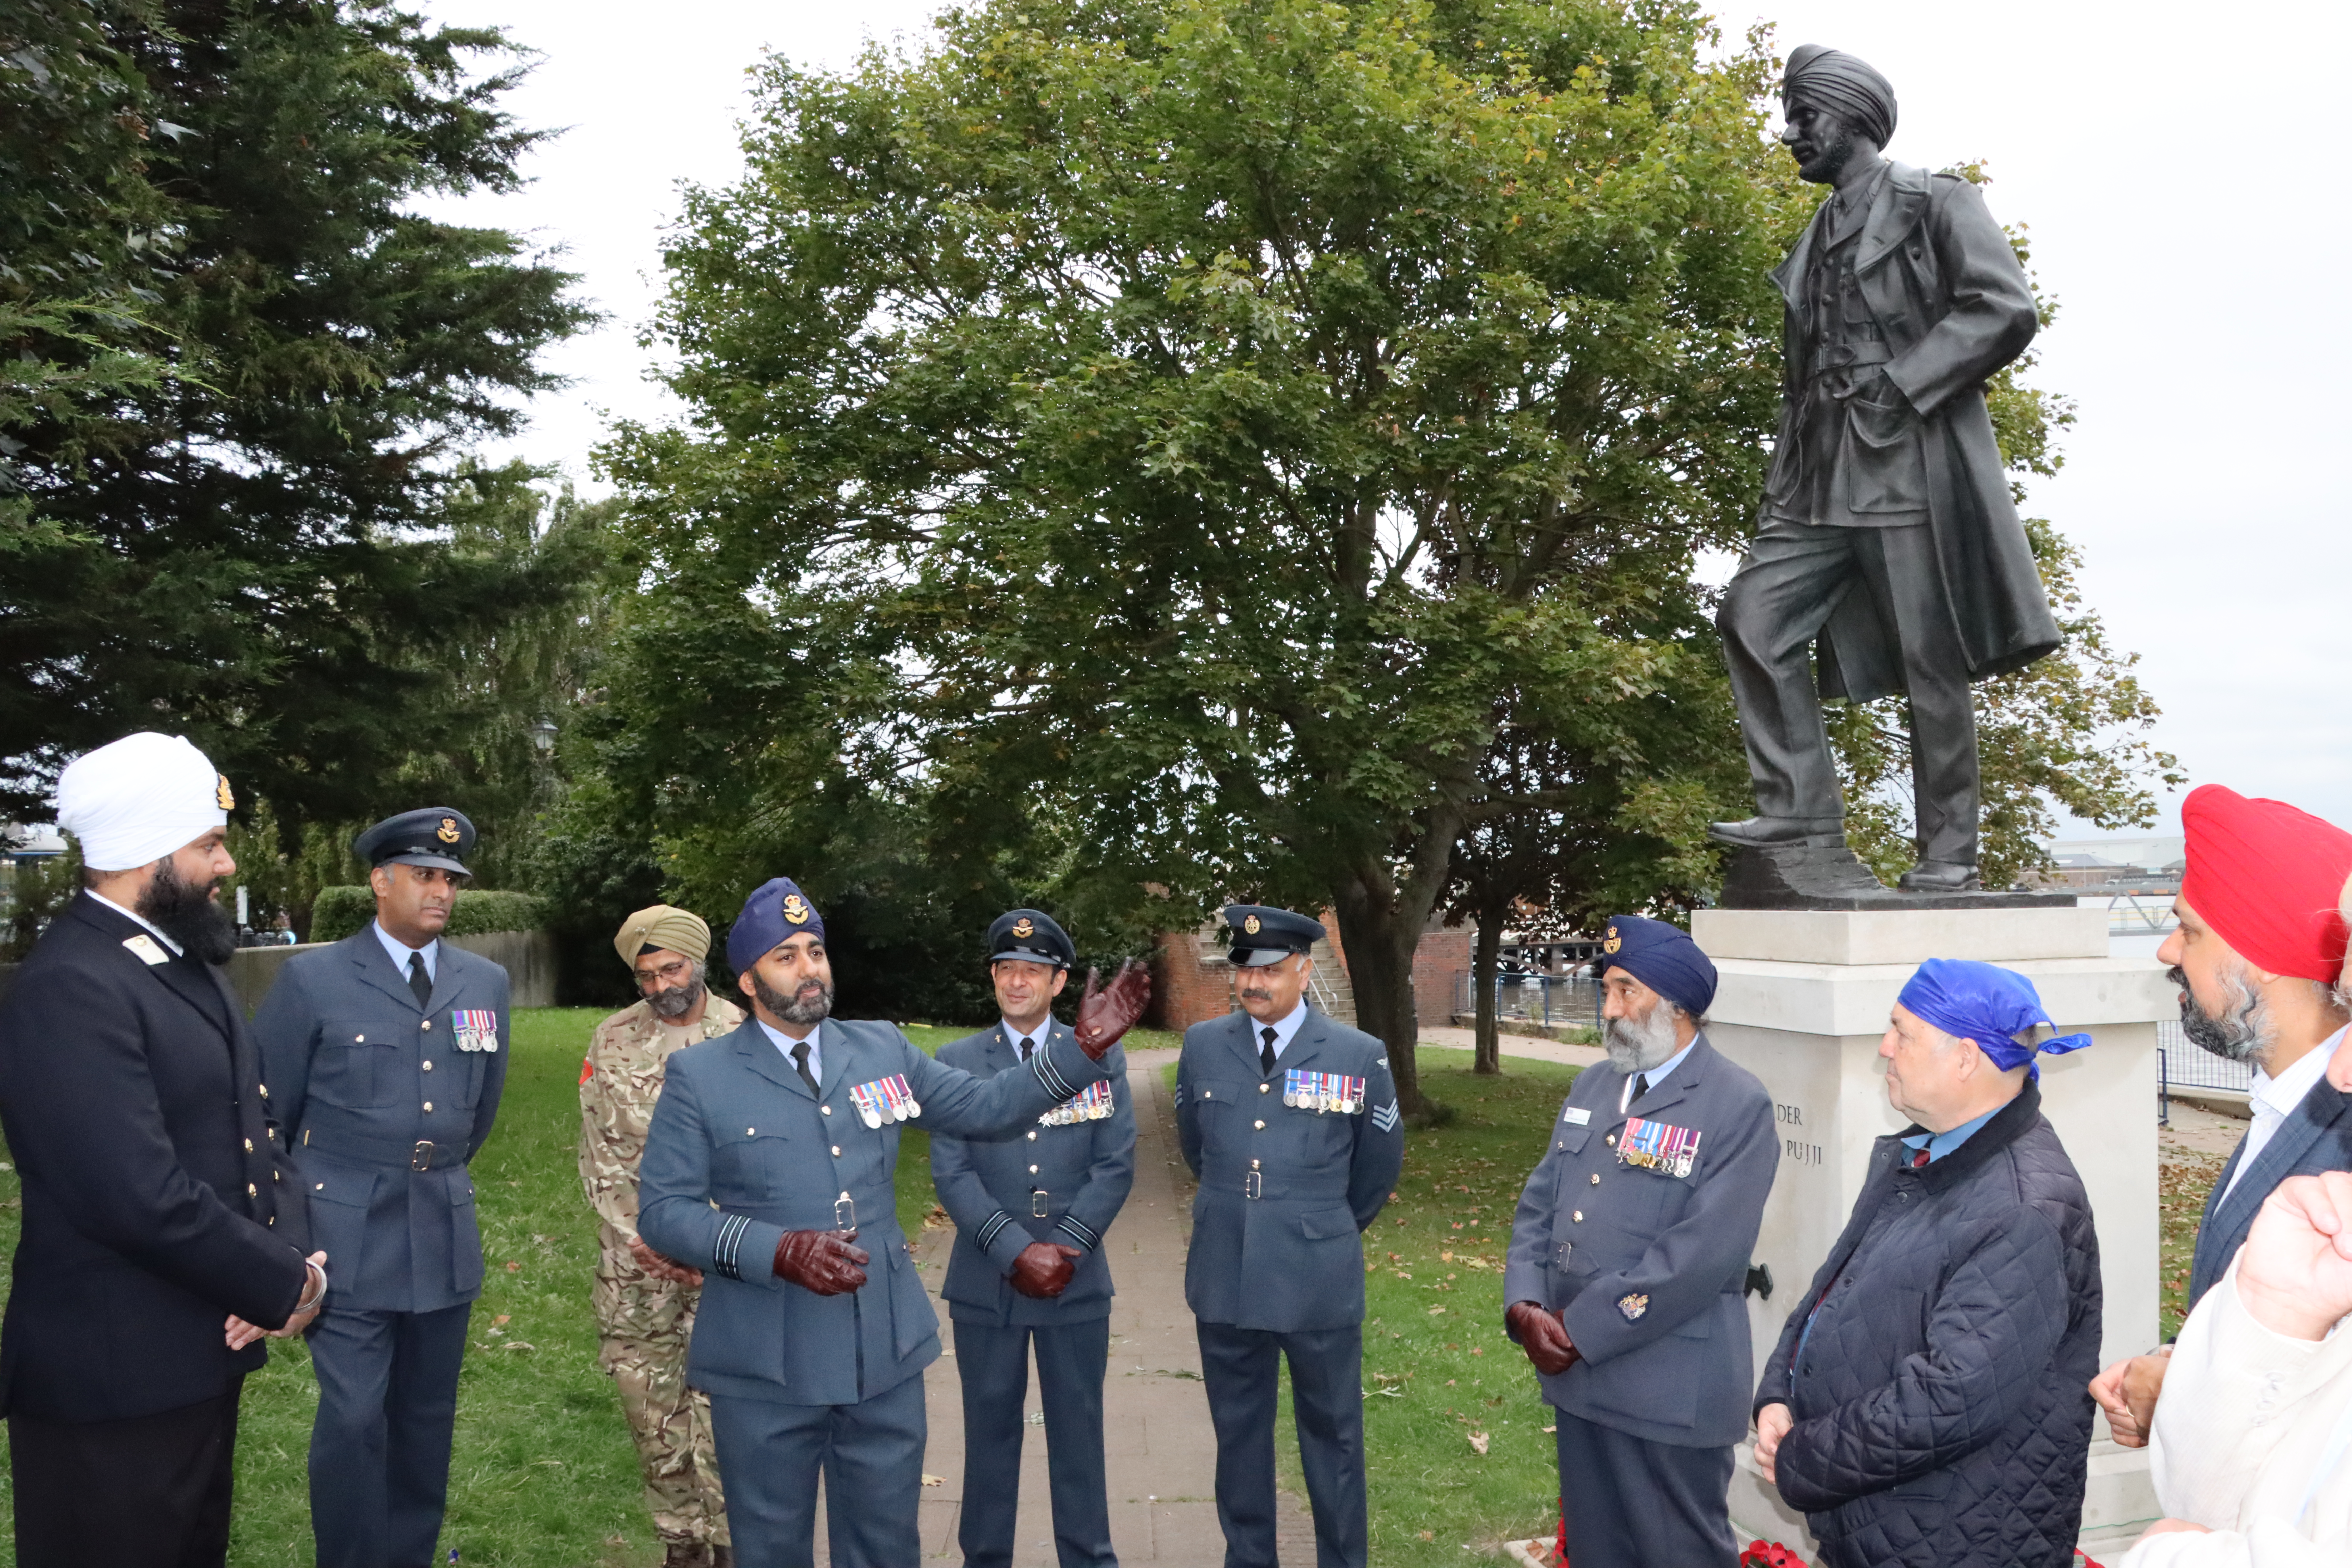 Personnel in Sikh attire stand by the Statue.